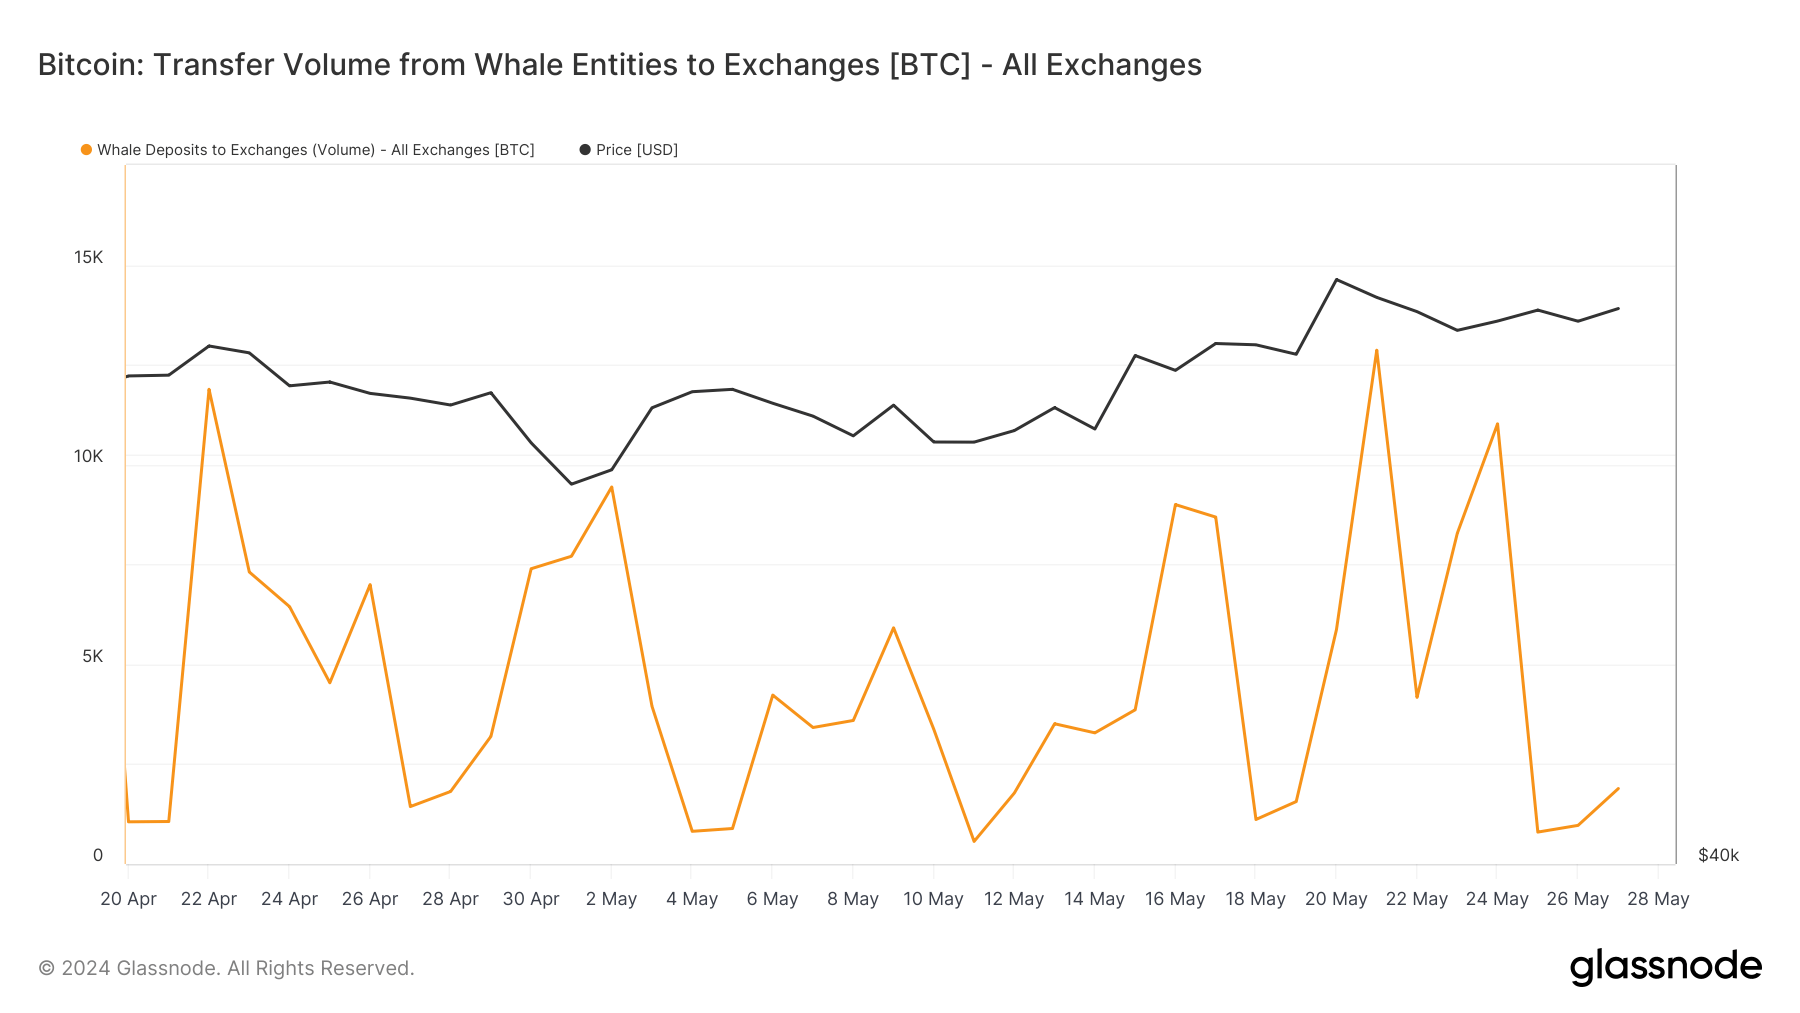 Bitcoin: Transfer Volume from Whale Entities to exchanges: (Source: Glassnode)